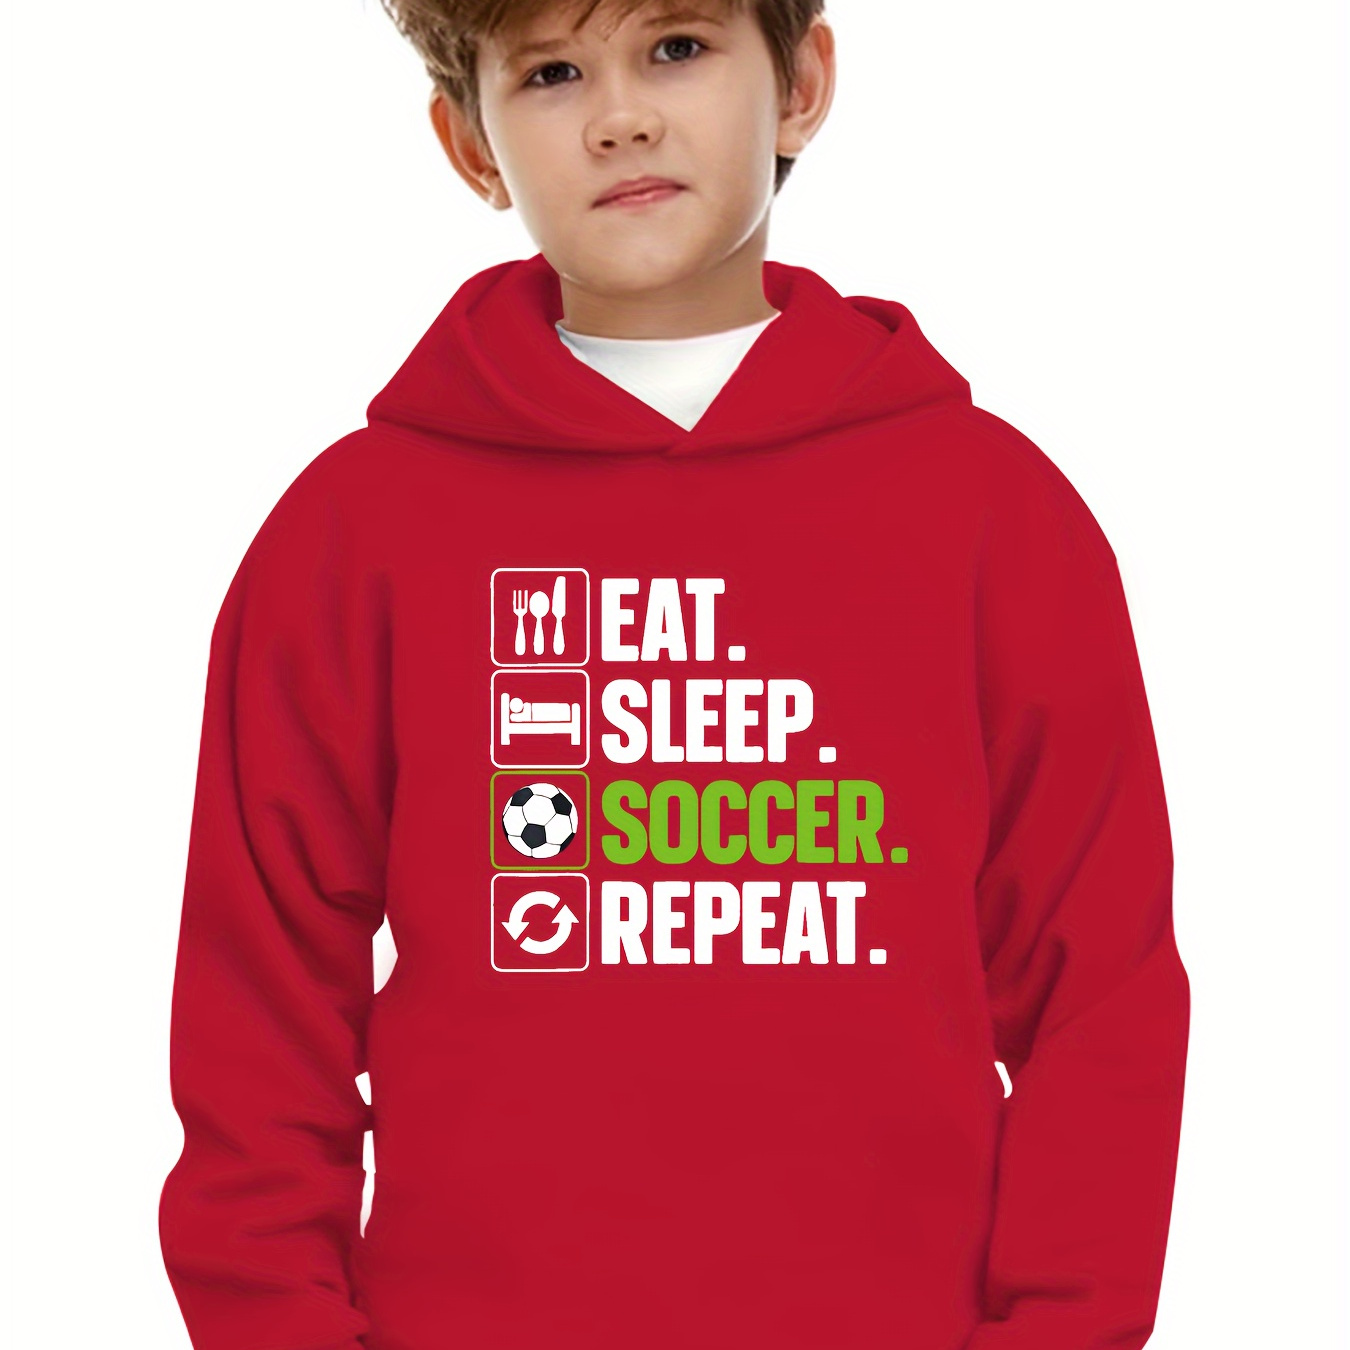 

Trendy Eat Sleep Soccer Repeat Letter Print Hoodies For Boys - Casual Graphic Design With Stretch Fabric For Comfortable Autumn/winter Wear